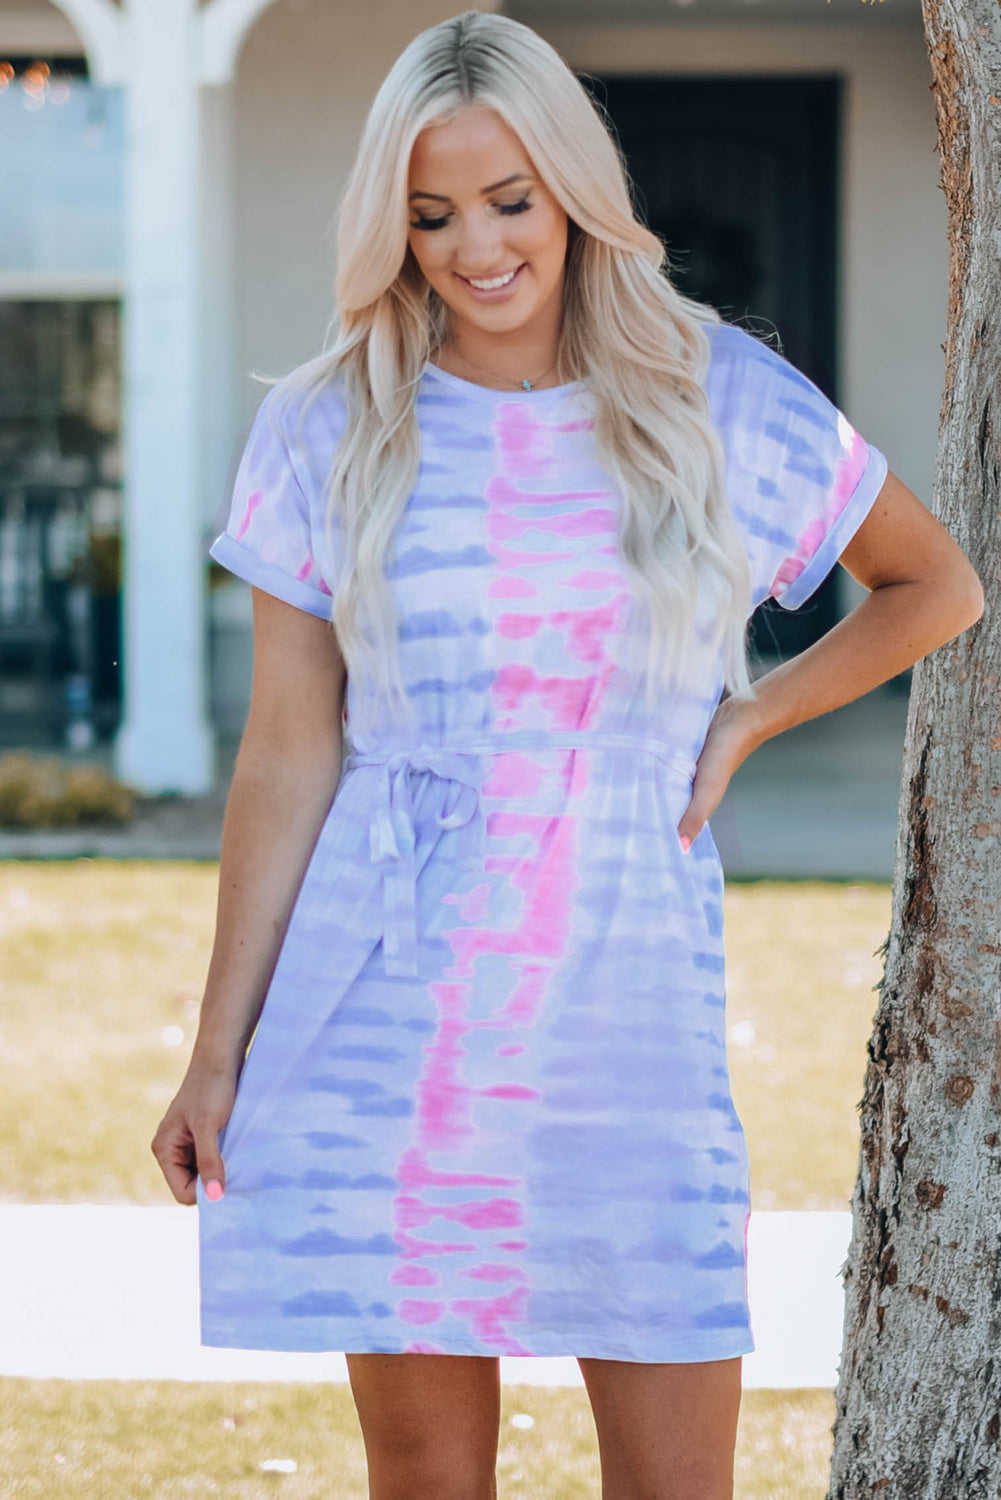 Summer Love Story Dress - Ignite Your Inner Goddess and Captivate Hearts with Enchanting Tie-Dye Magic. - Guy Christopher 